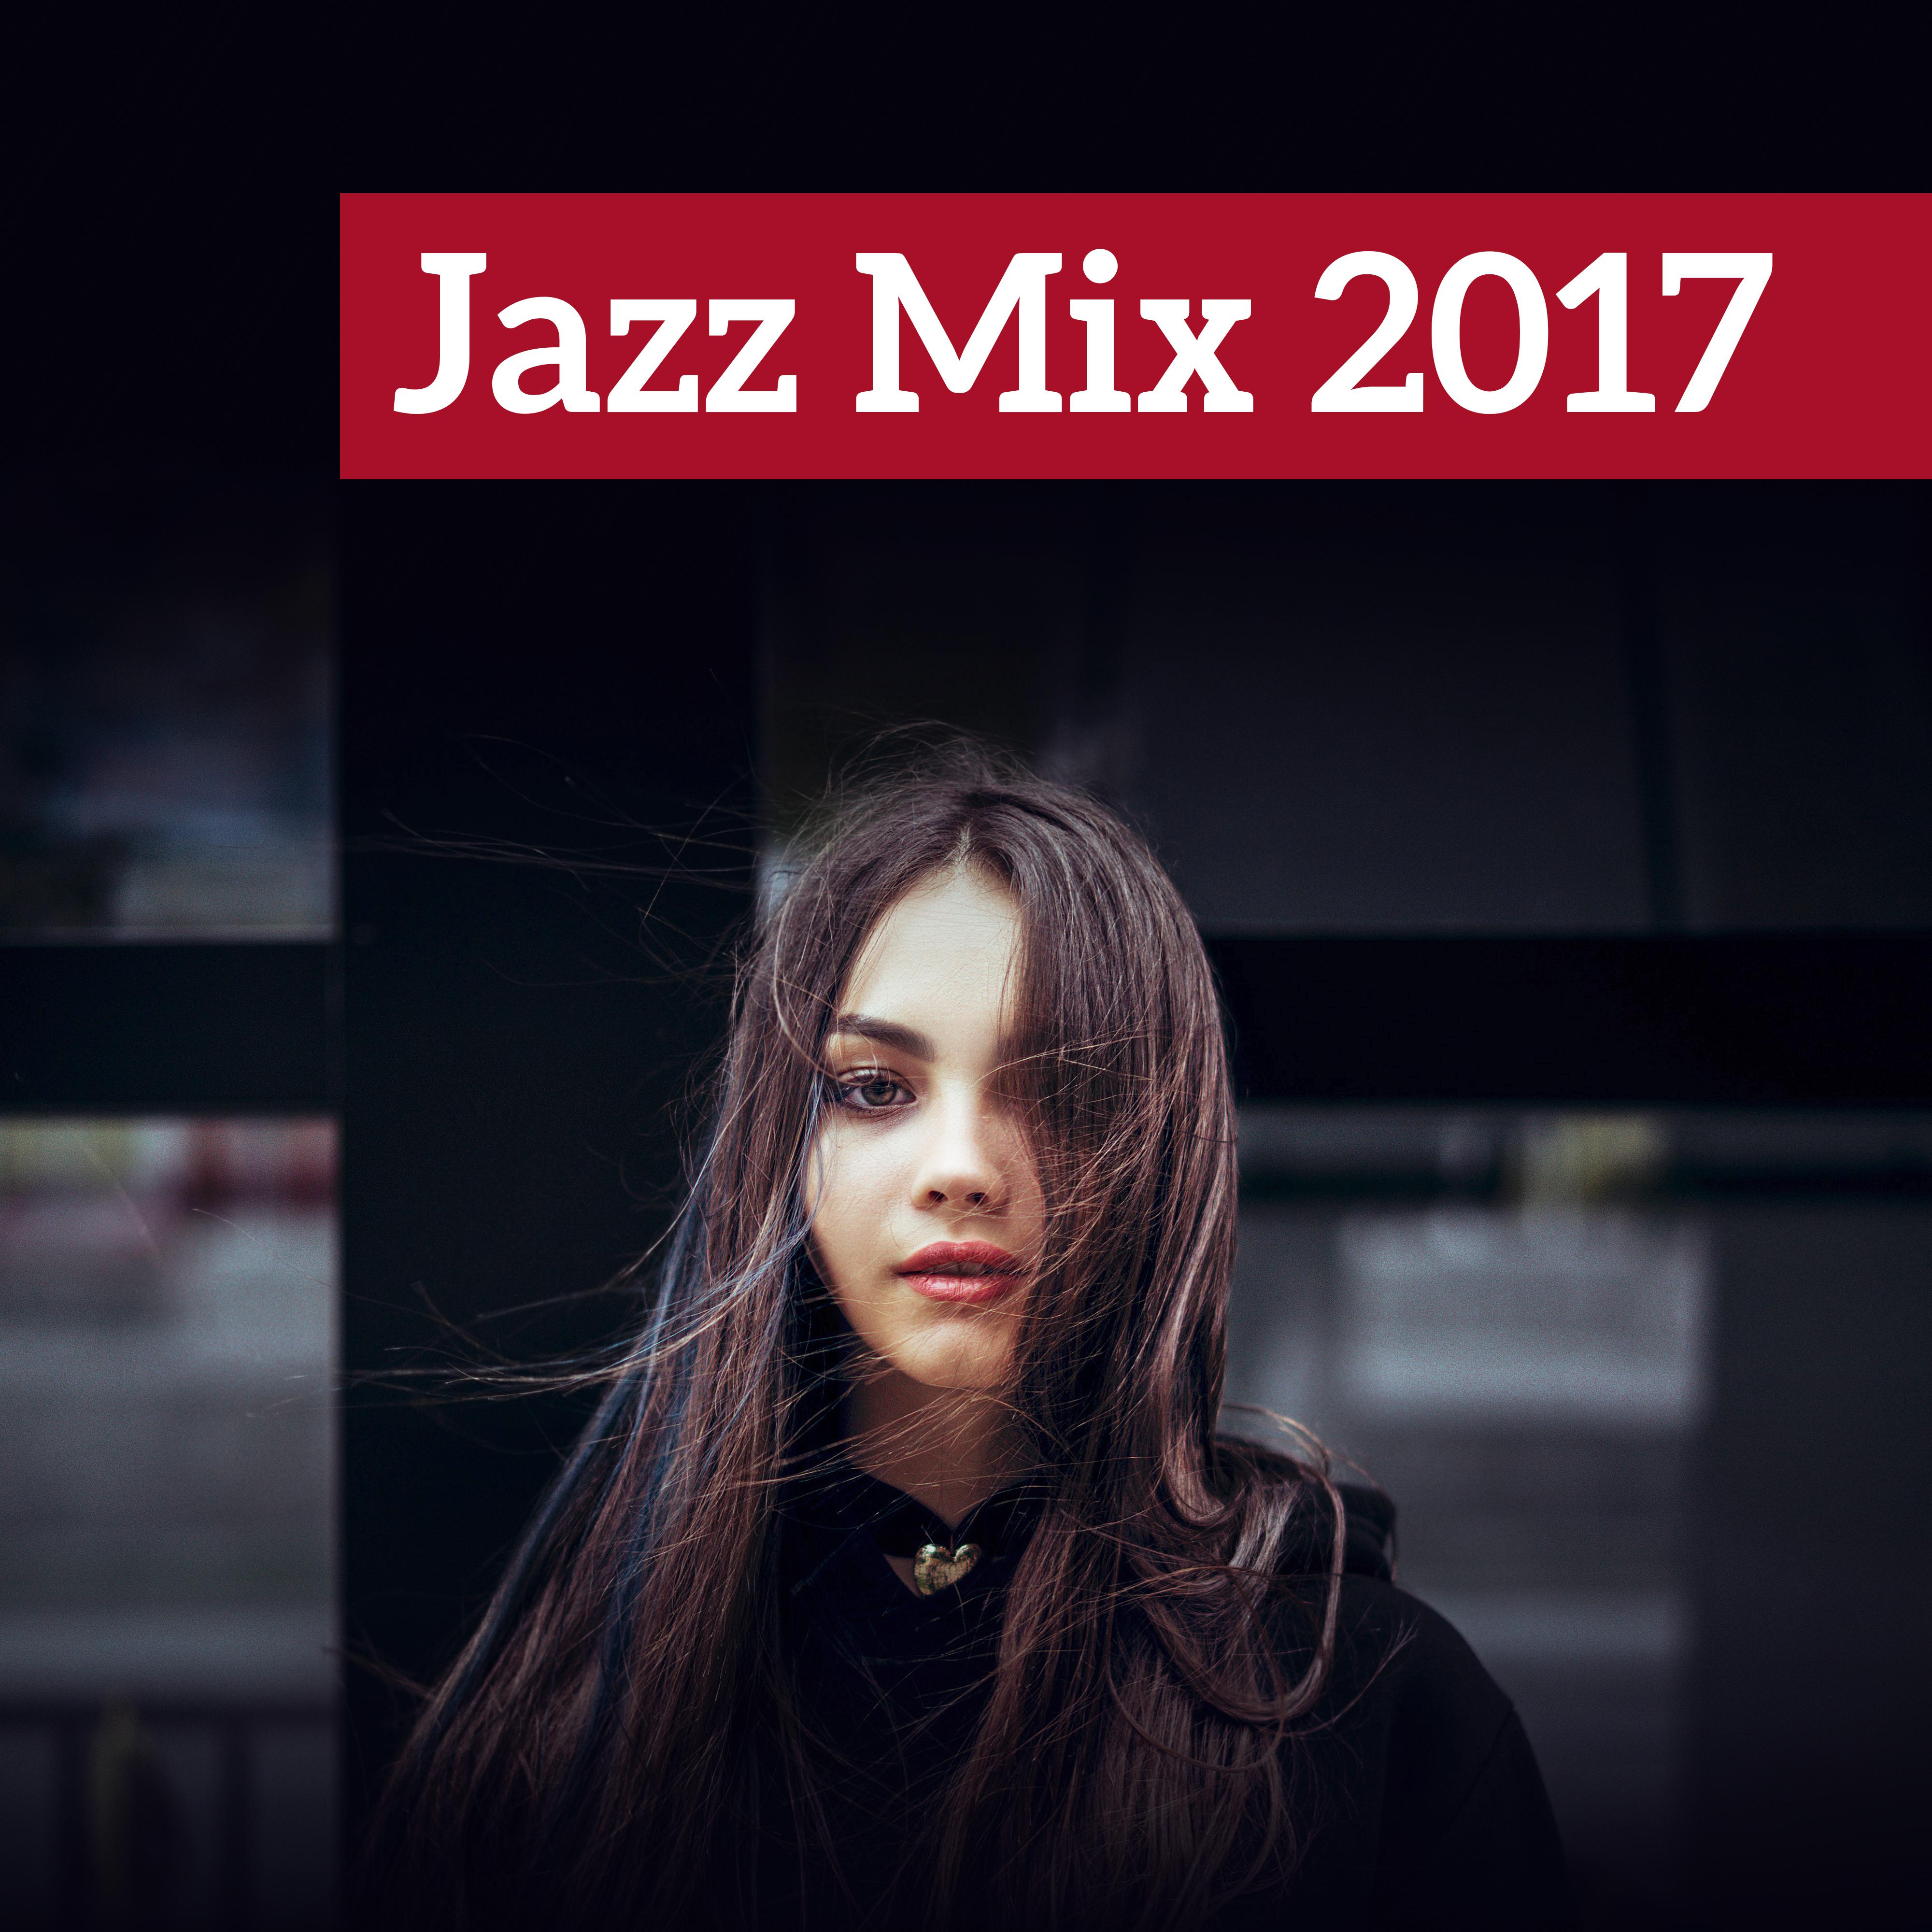 Jazz Mix 2017 – Relaxing Jazz, Instrumental, Ambient Music, Saxophone Summer Session